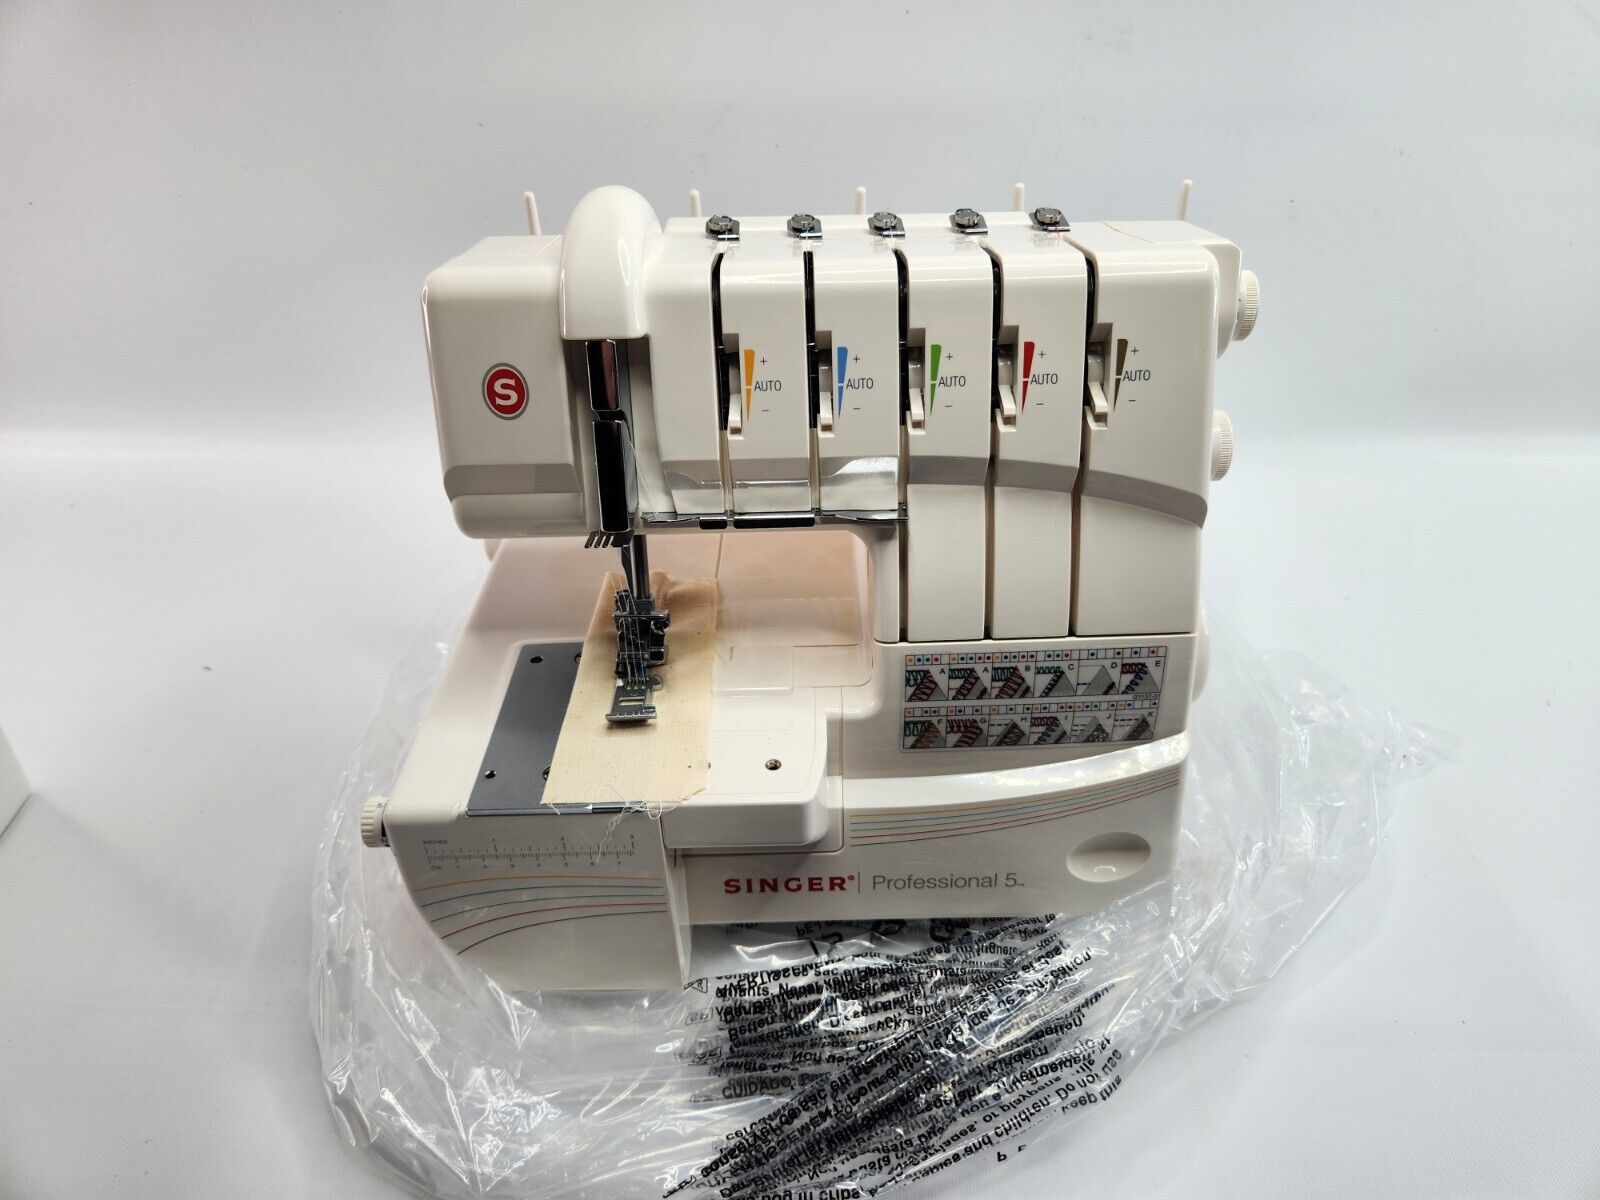 SINGER Professional 14T968DC Serger Overlock with 2-3-4-5 Stitch Capability